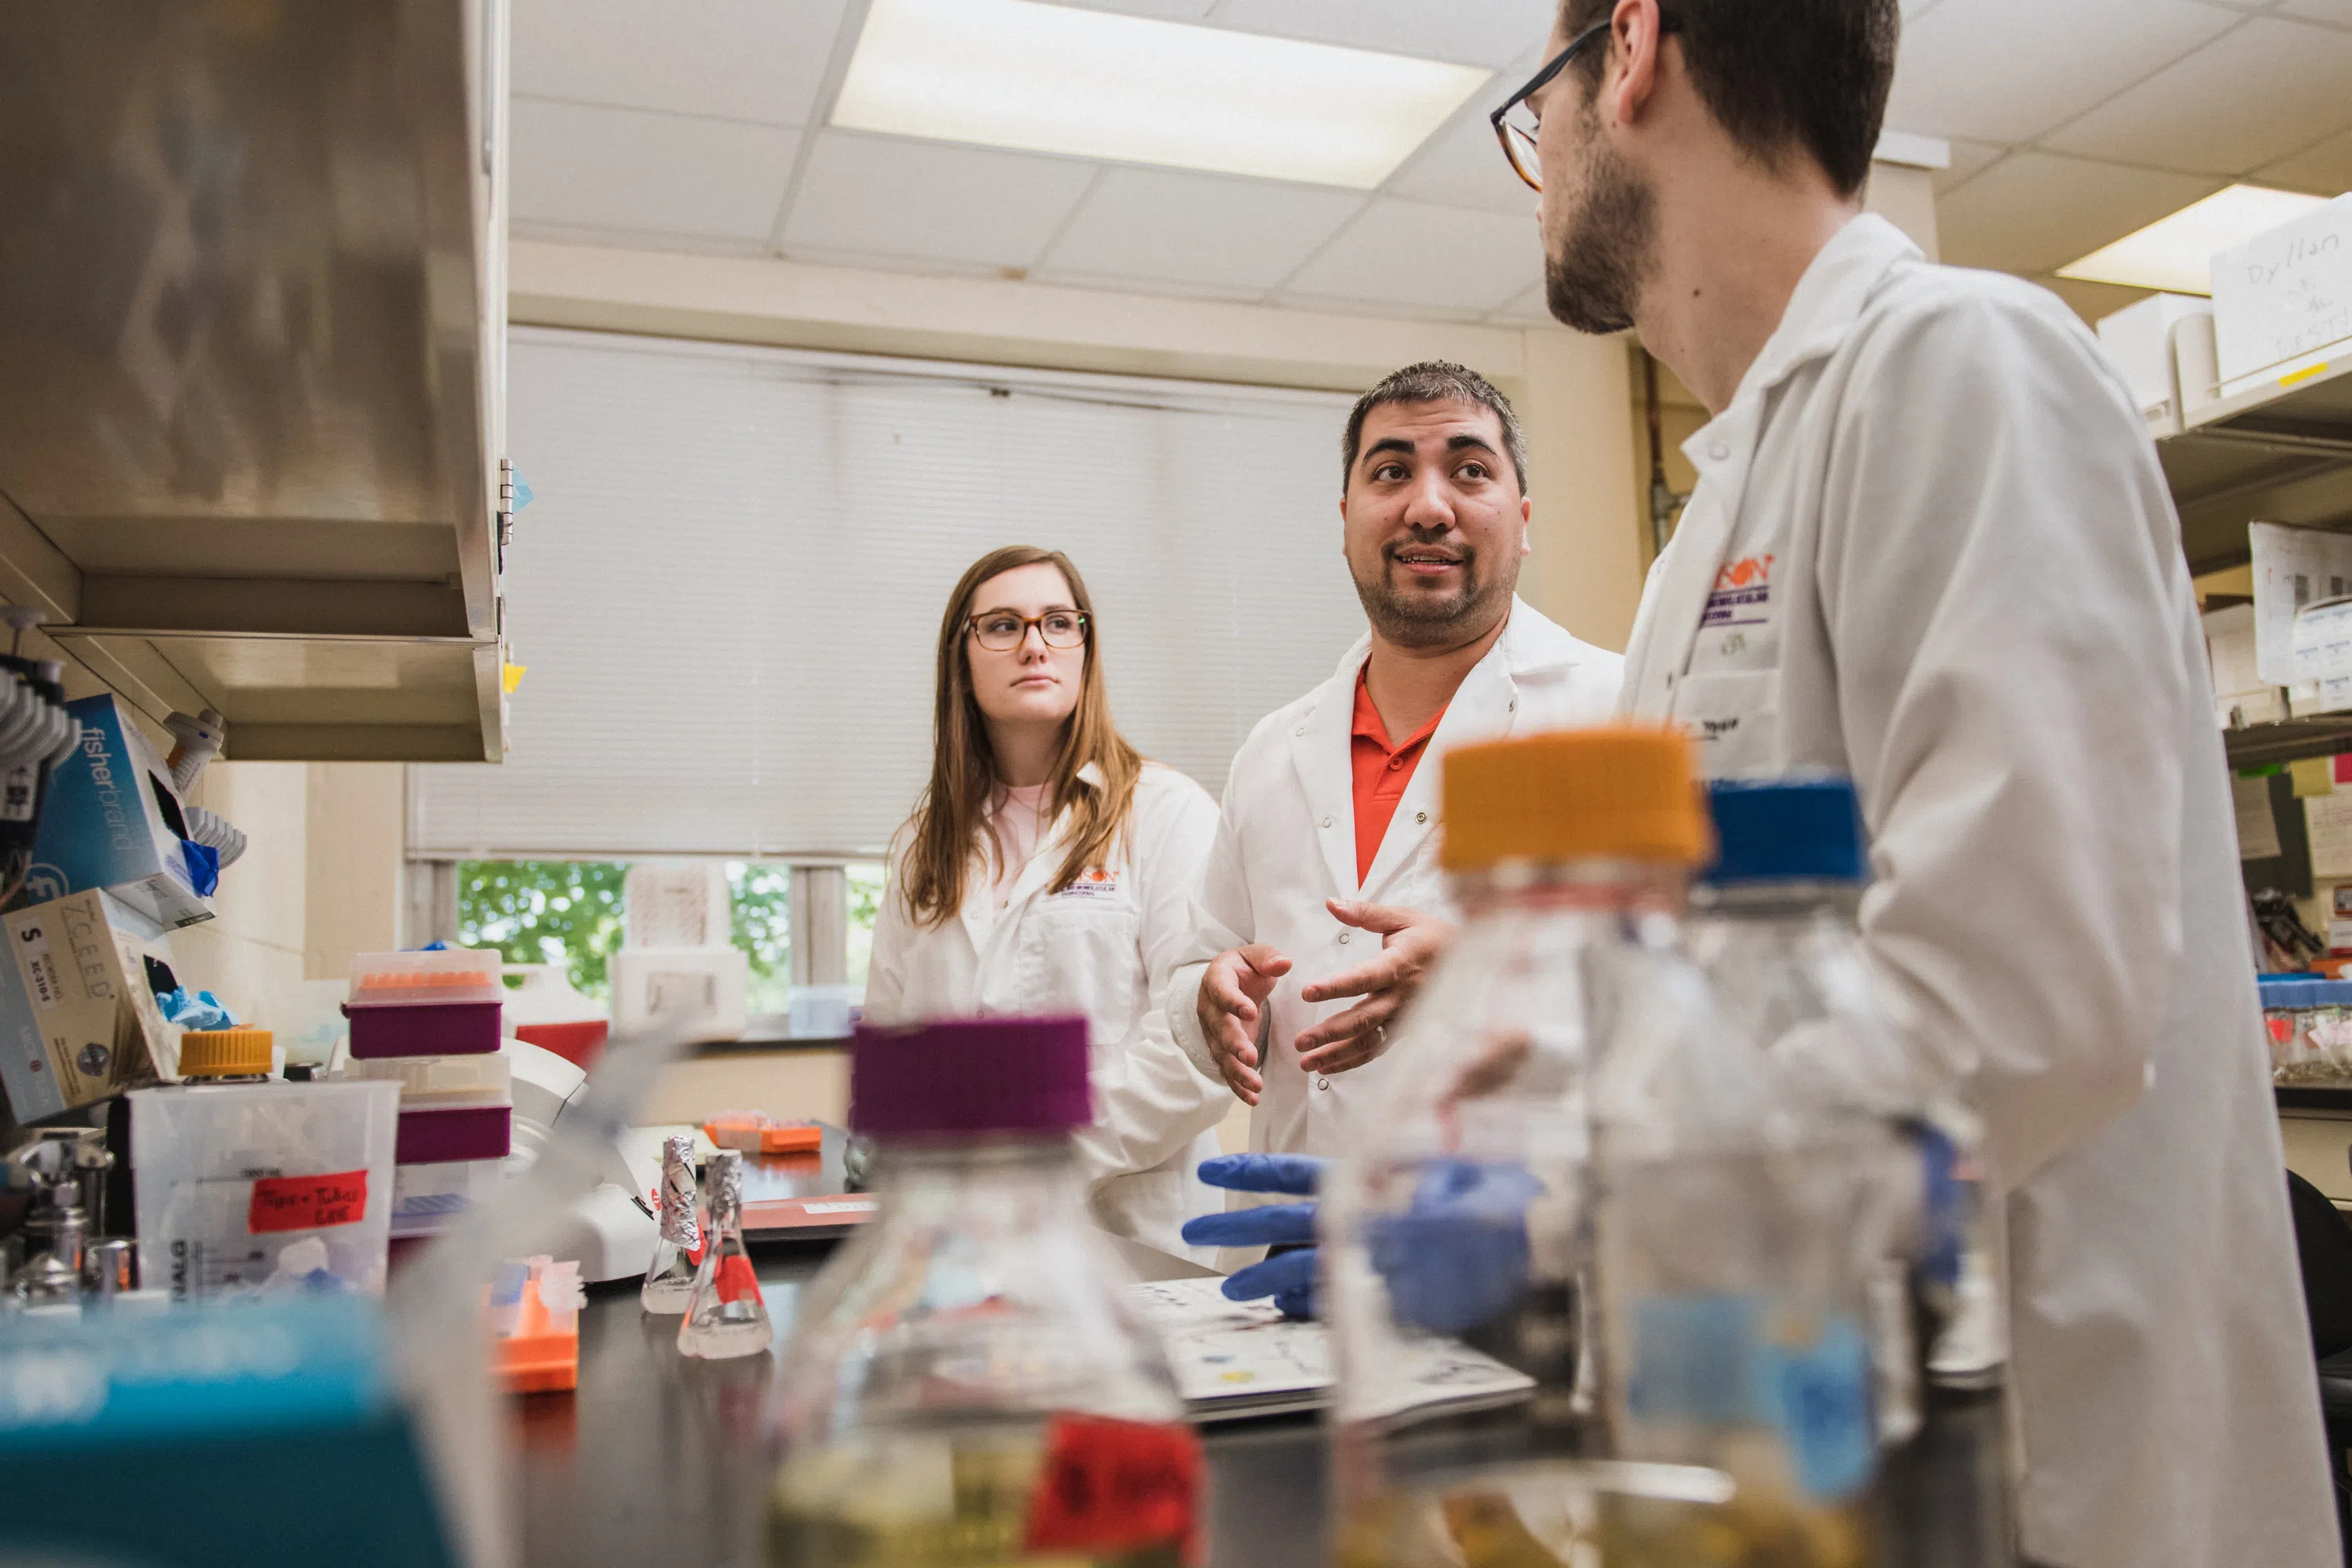 Chemical Engineering professor Mark Blenner works in the lab with two students.